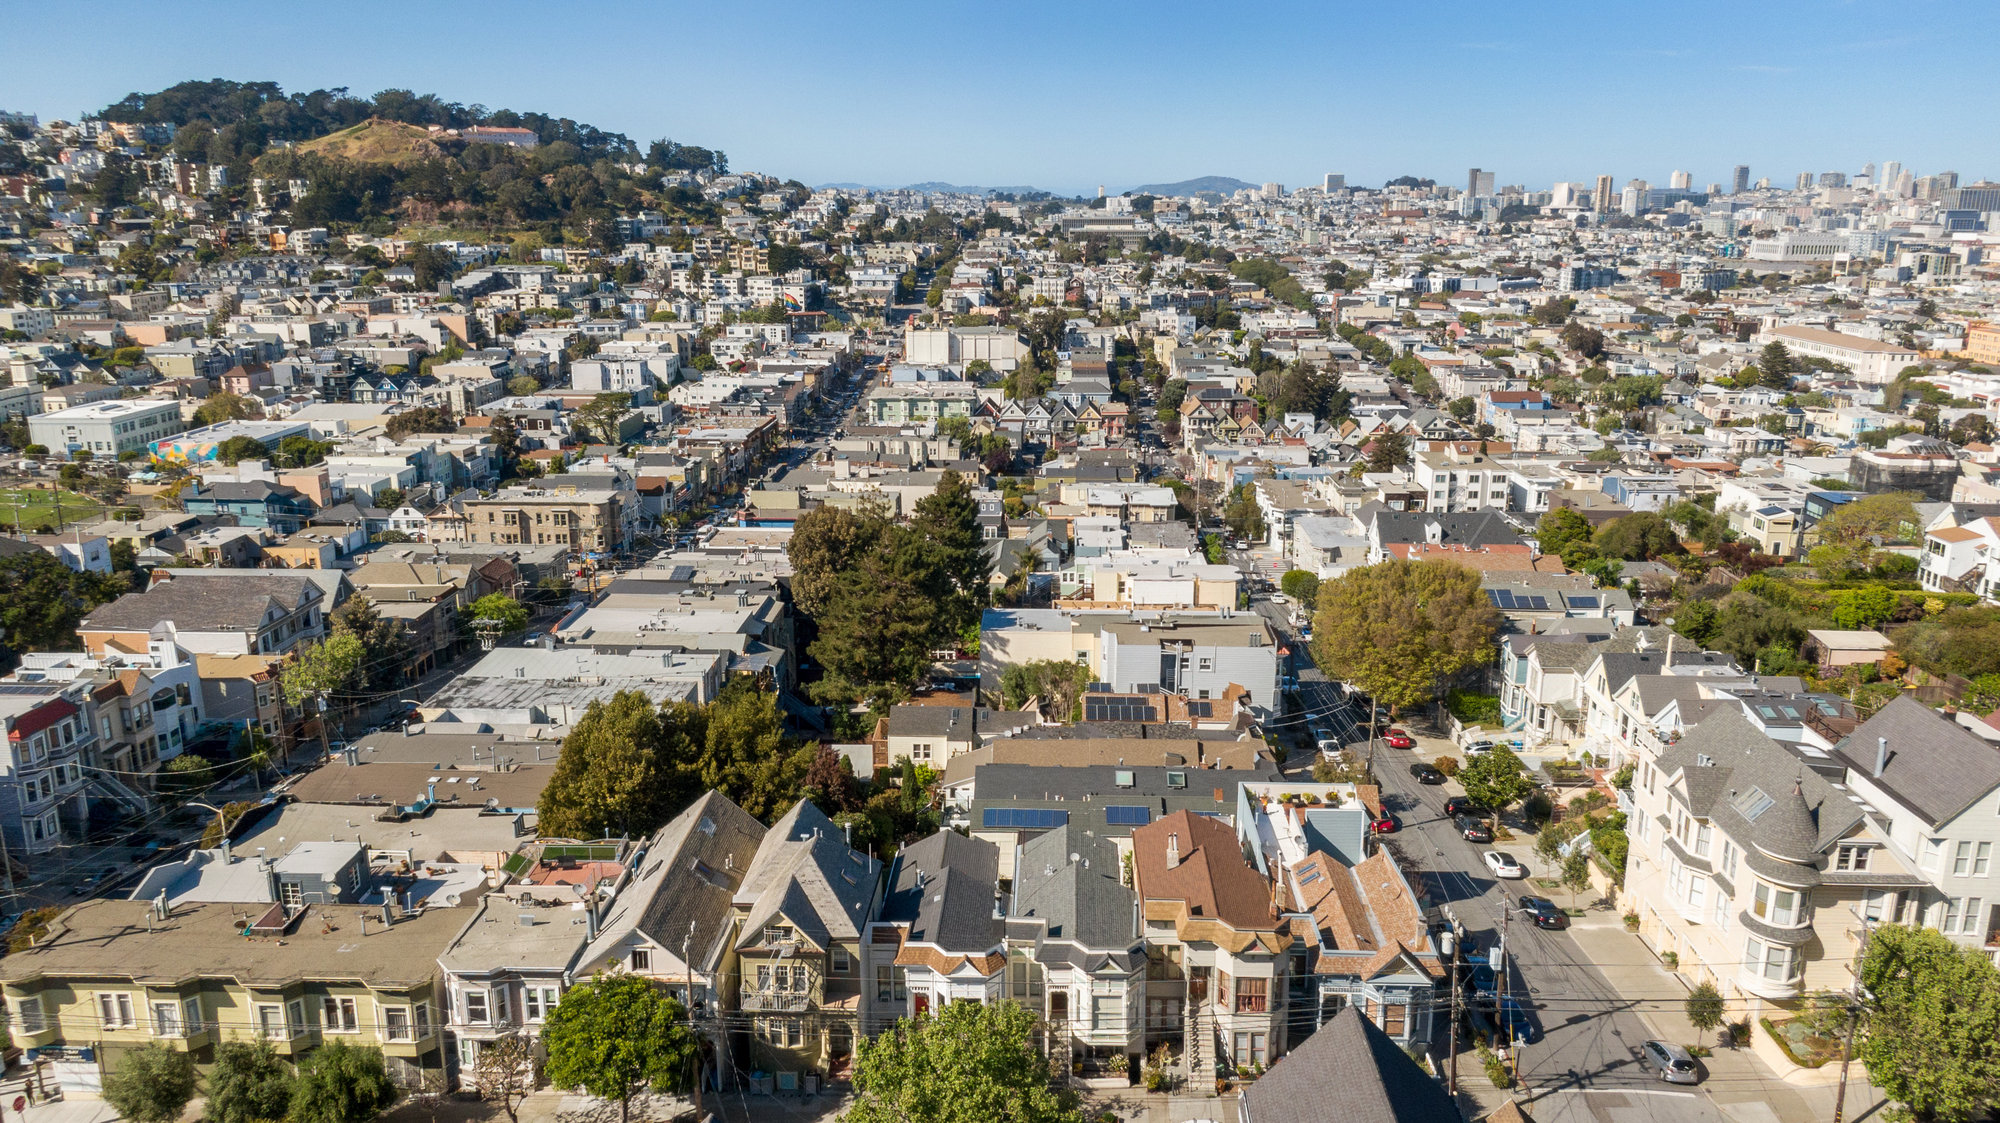 Property Photo: Aerial view of 4160-4162 20th Street, showing San Francisco in the background